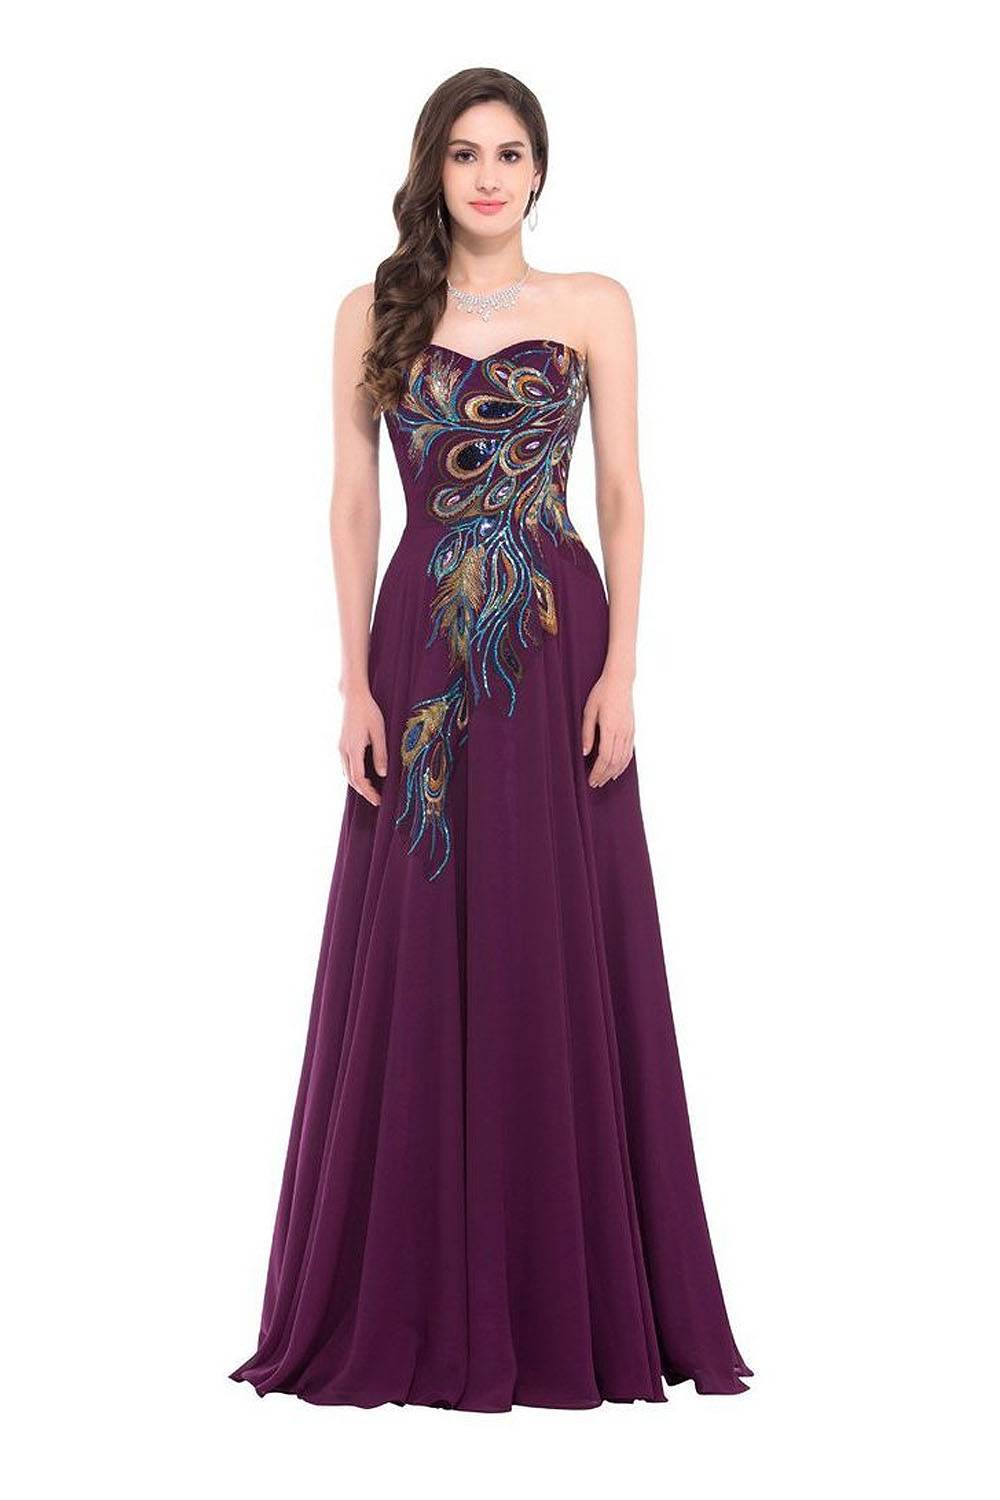 beyond runway rent prom gown